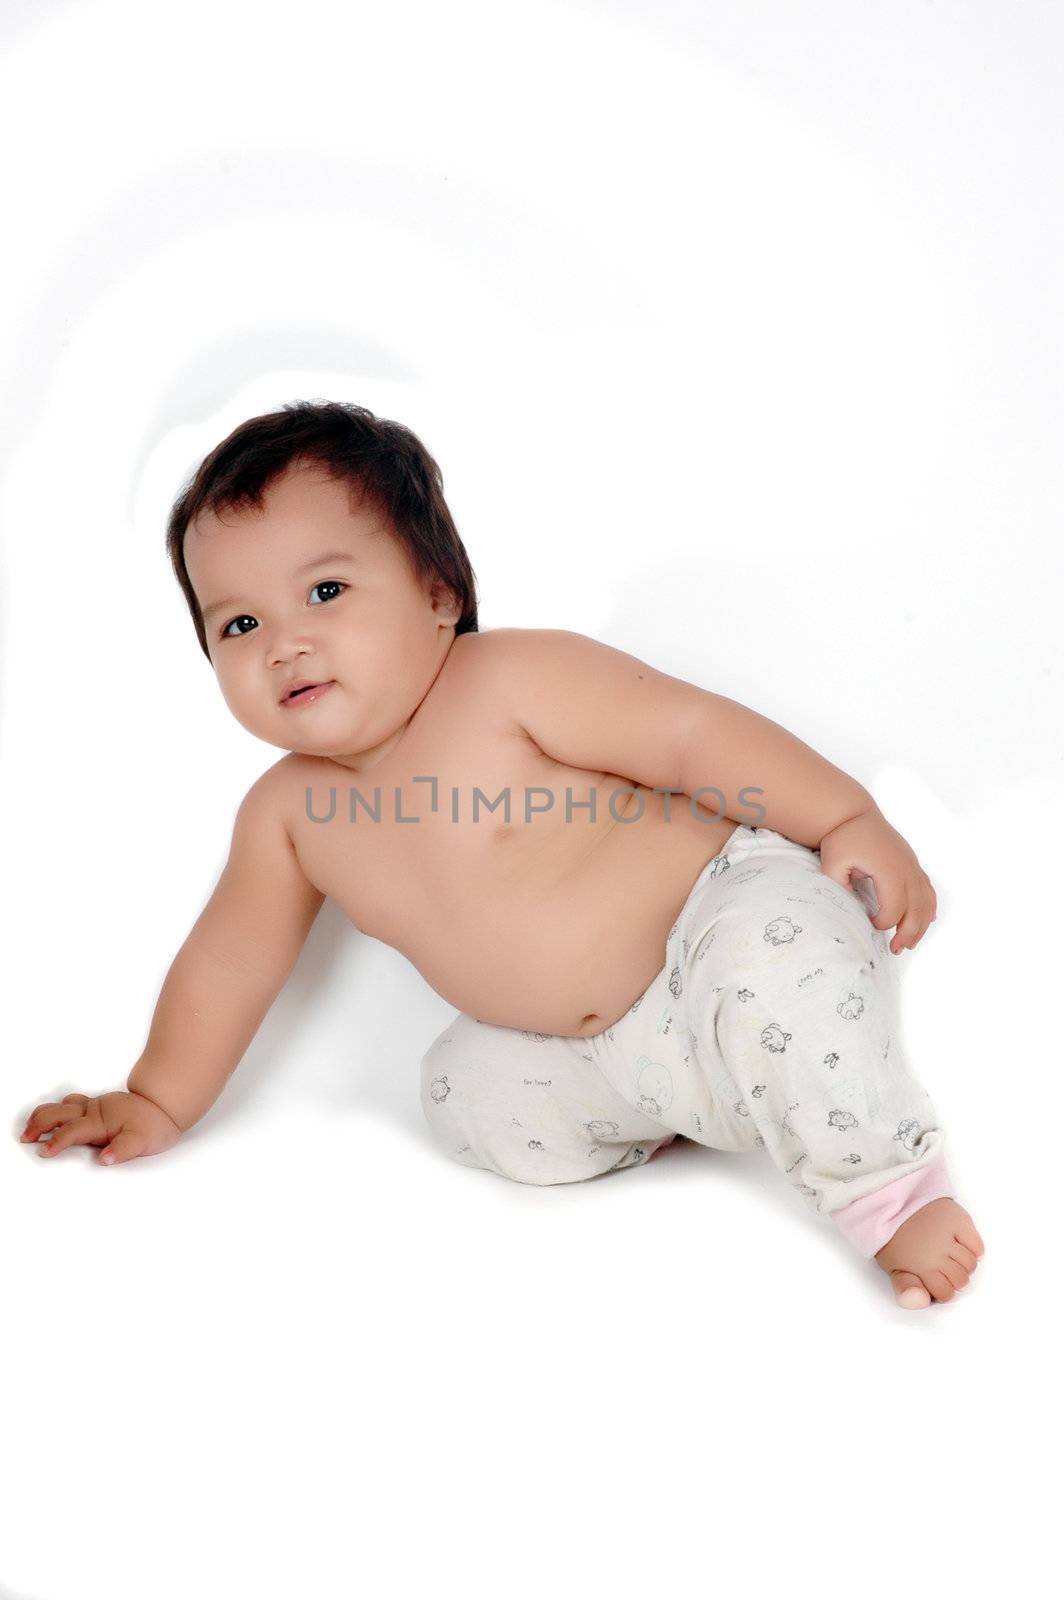 a chubby little girl posing isolated on white background